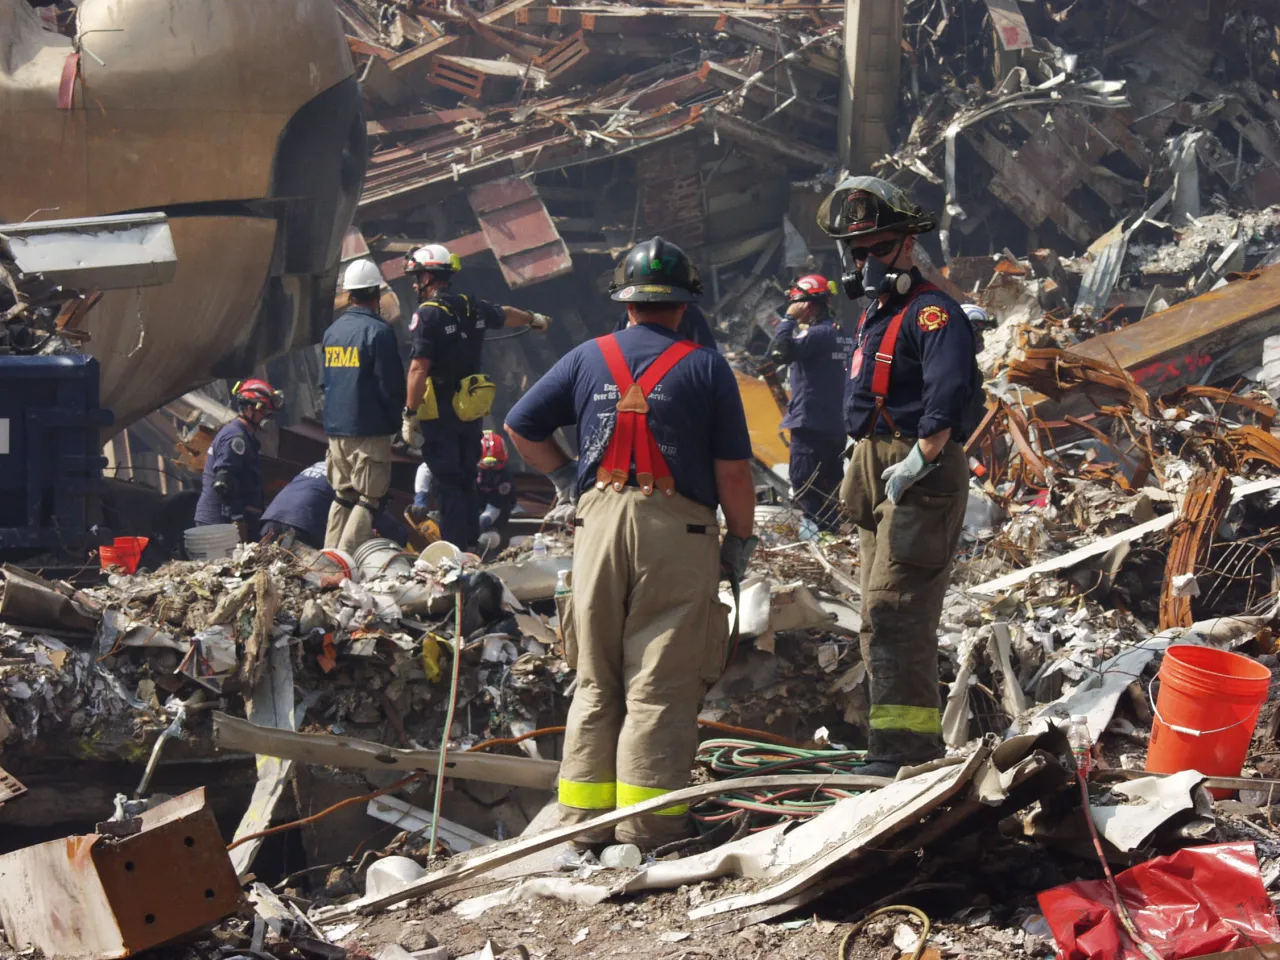 Image: 9/11 - New York City fire fighters and FEMA rescue workers continue to search for survivors at Ground Zero